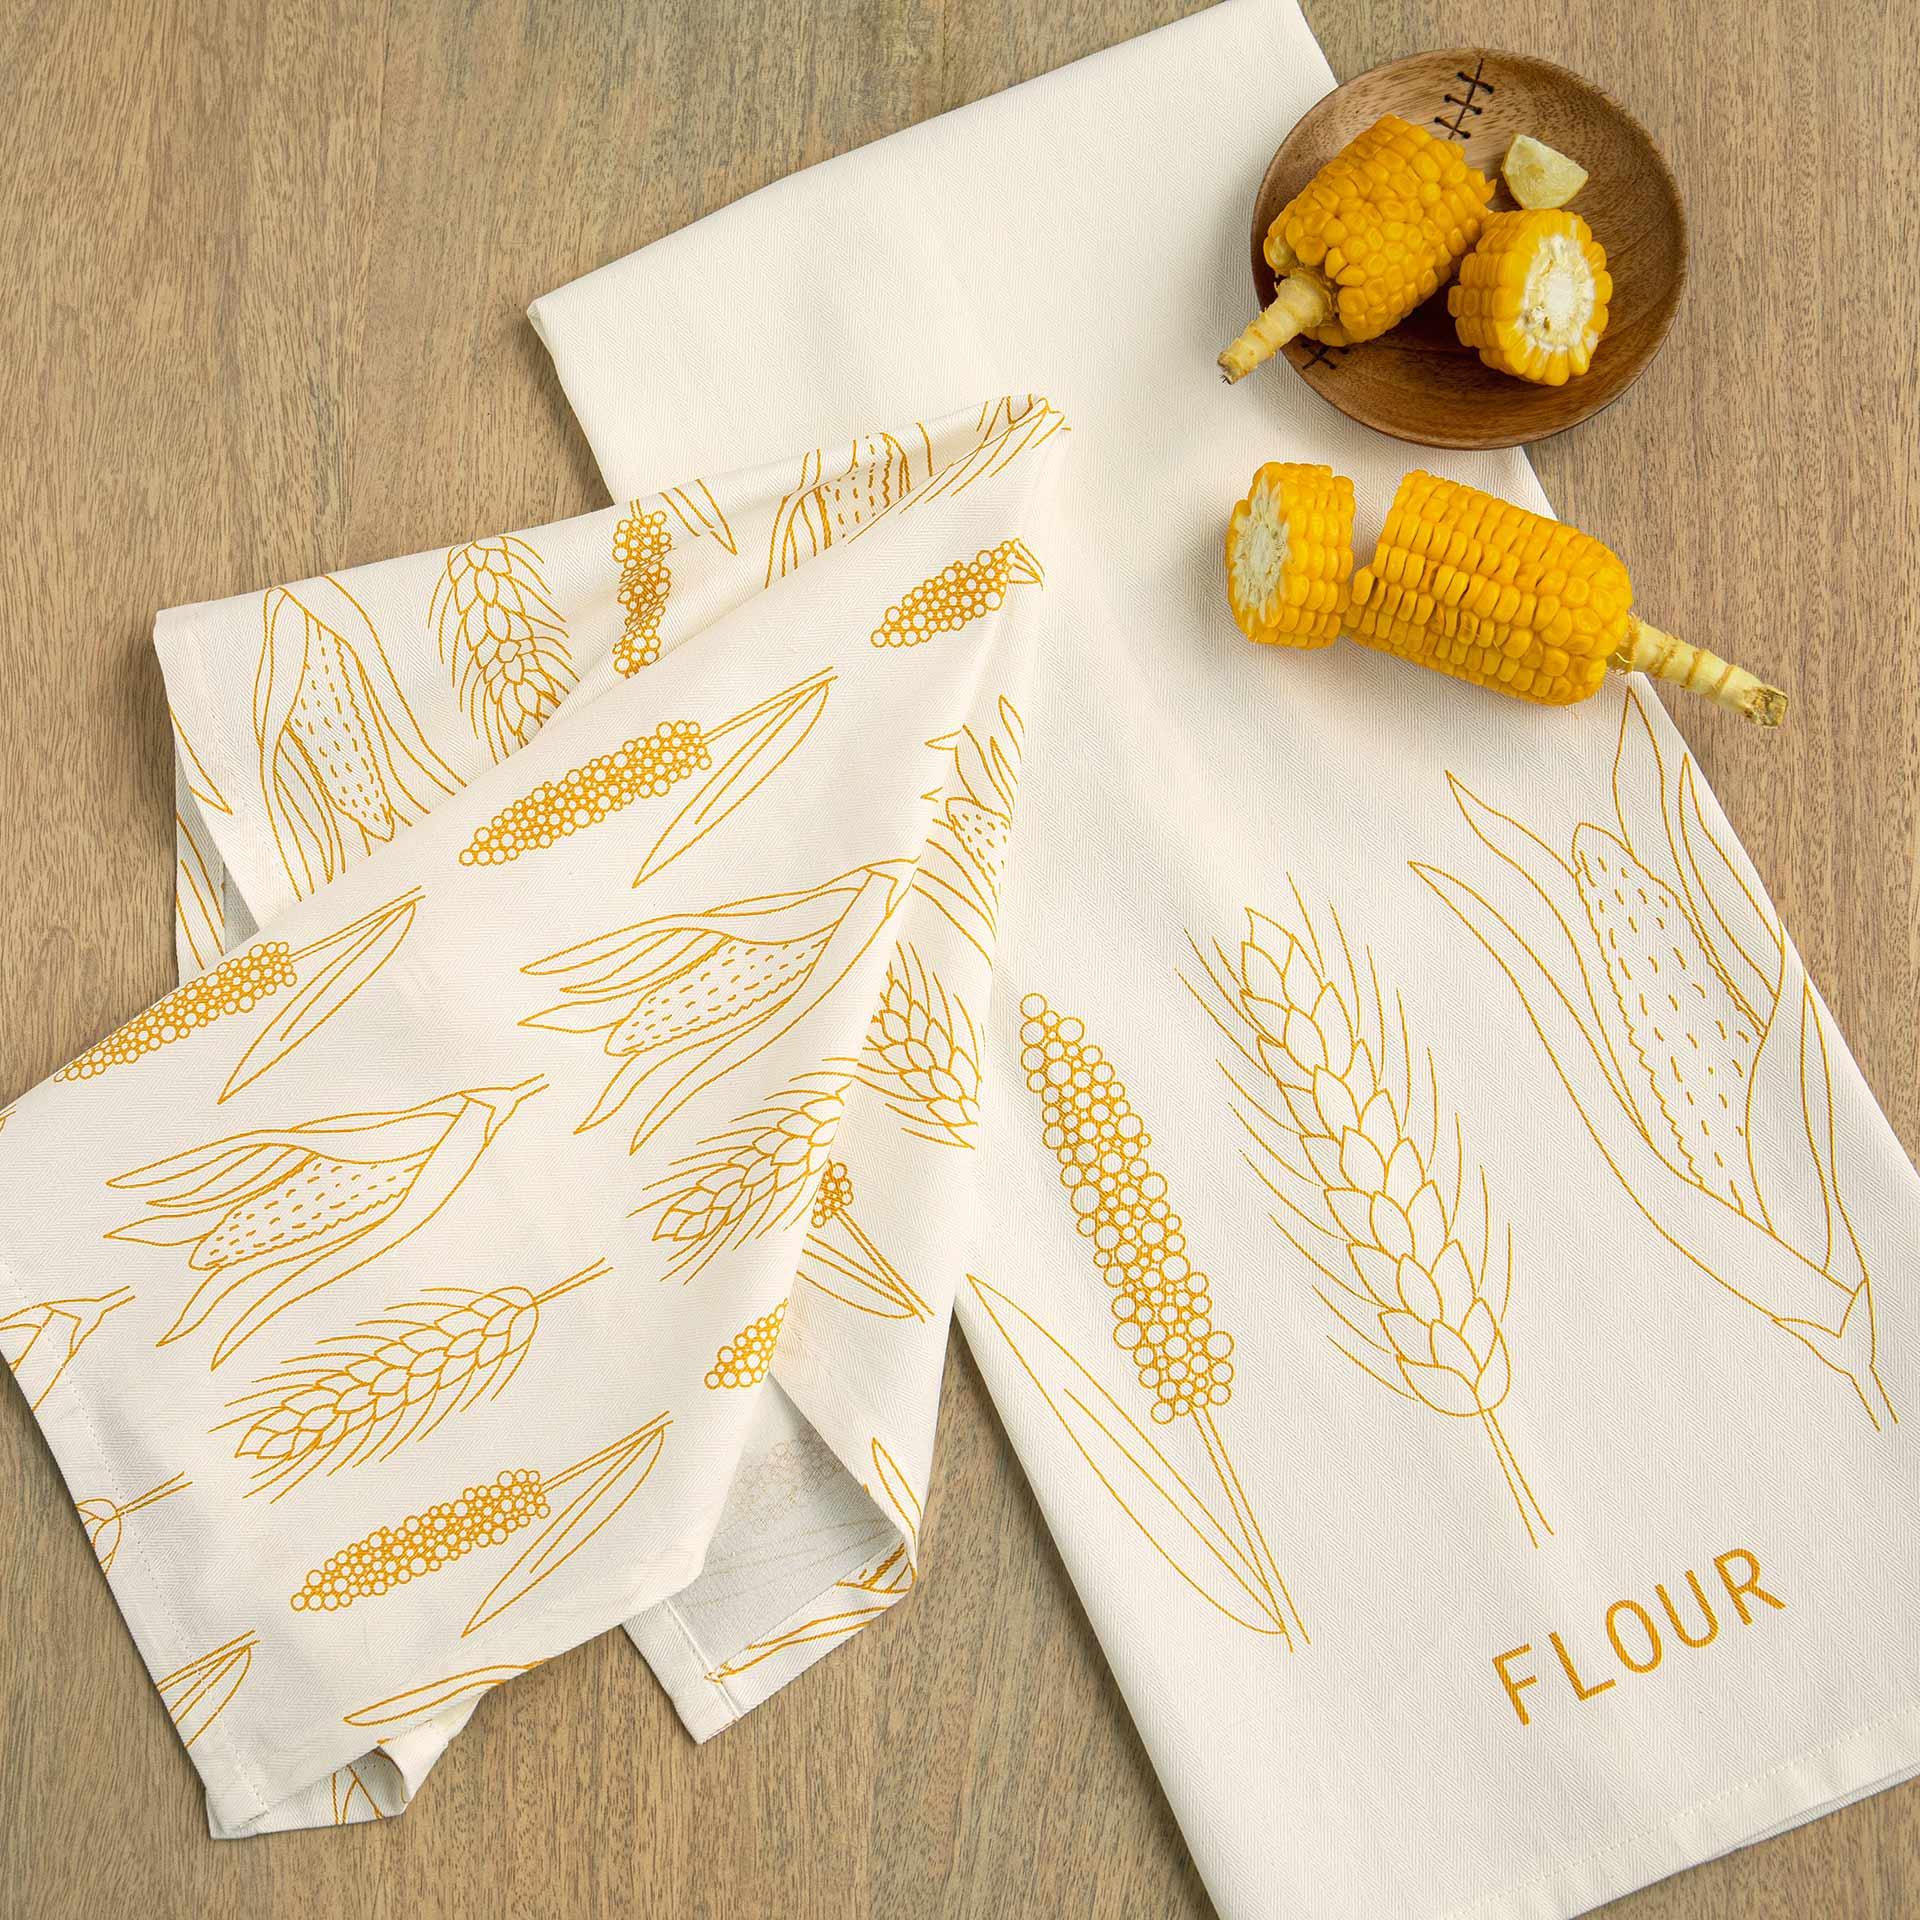 Flour Dish Towel Set of Two (Amber)